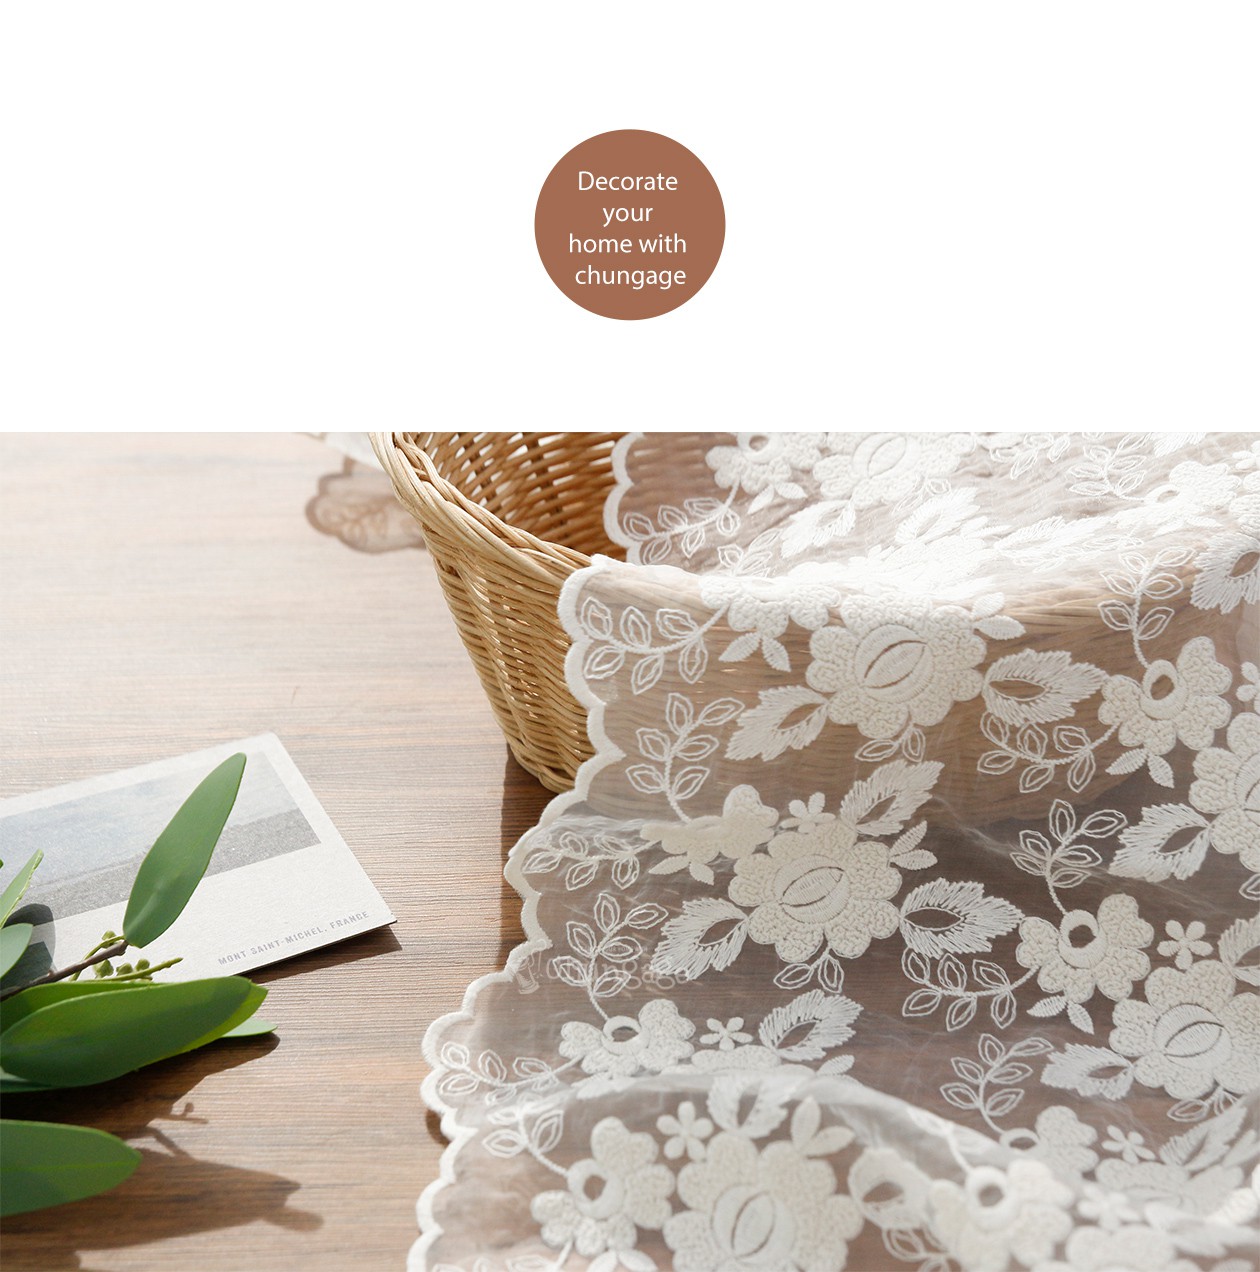 1) Lace fabric/Embroidery fabric